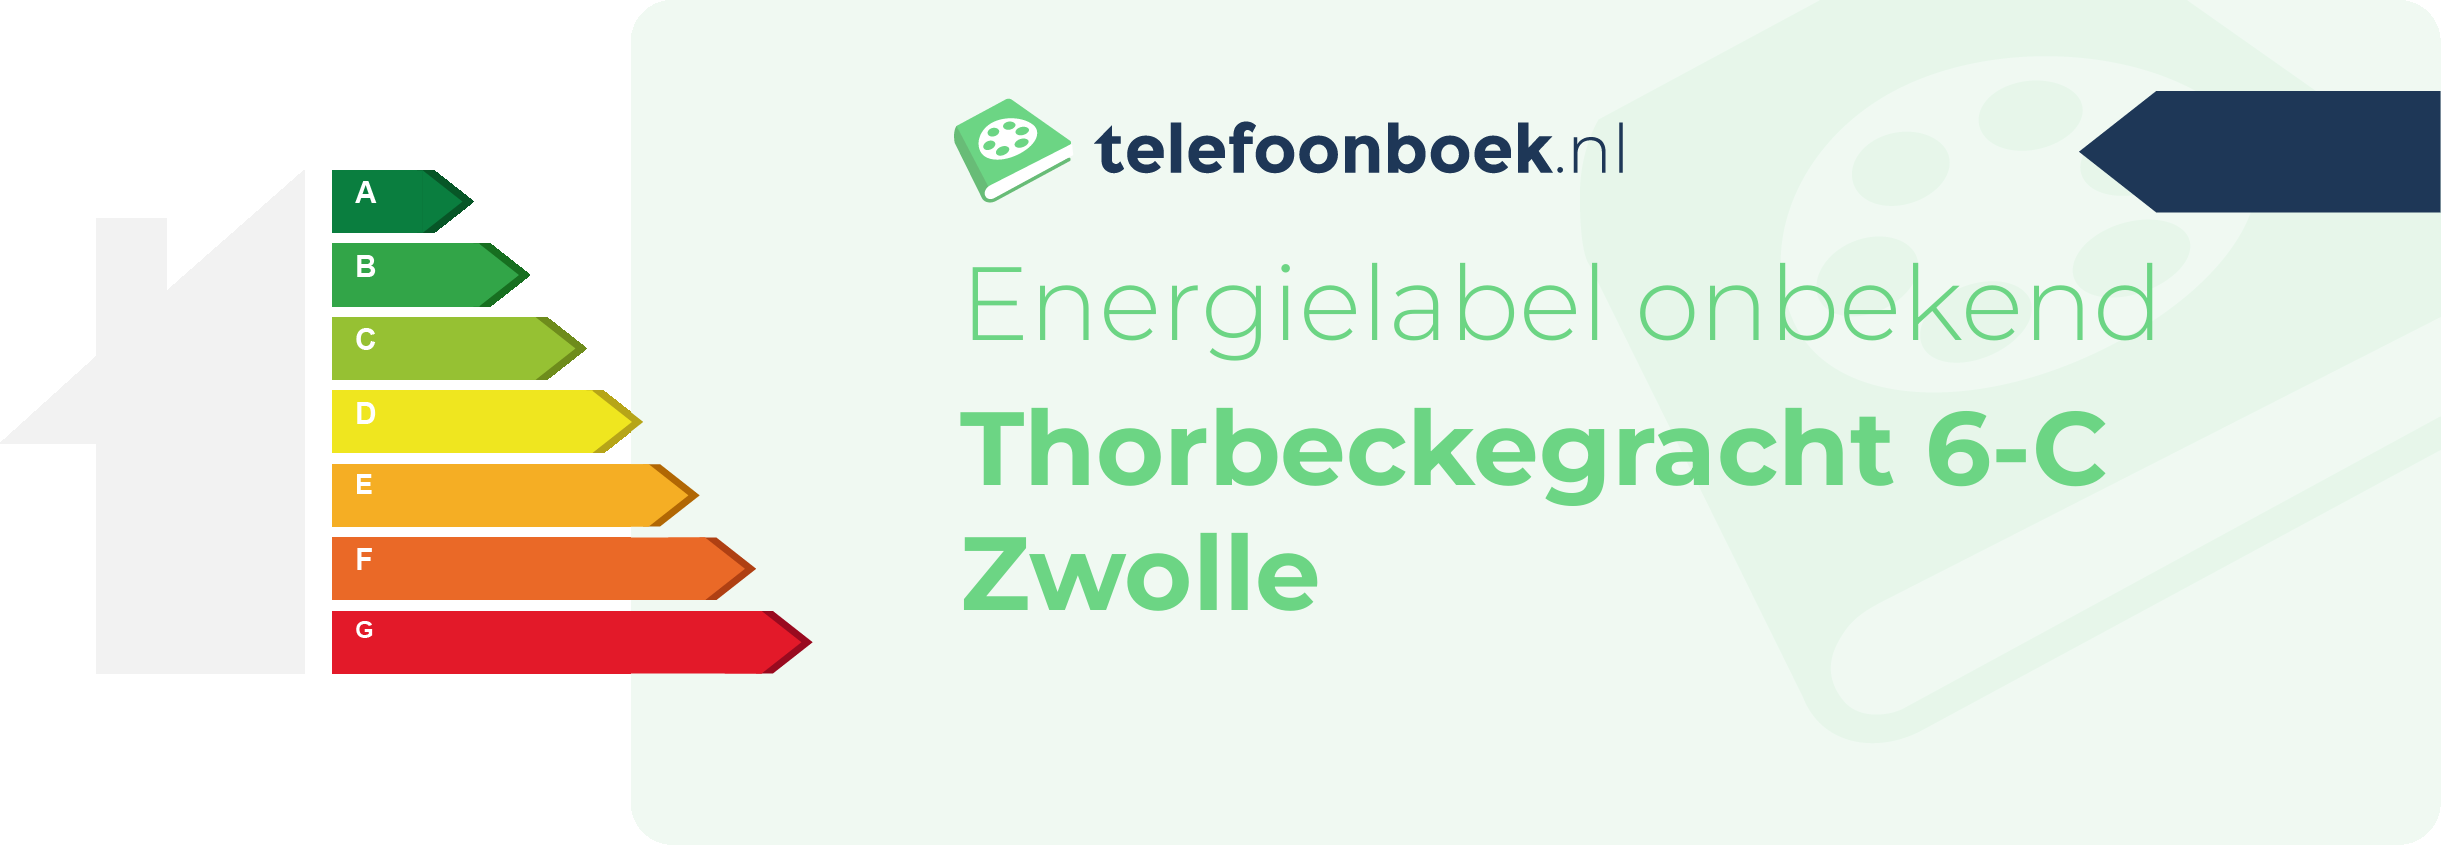 Energielabel Thorbeckegracht 6-C Zwolle